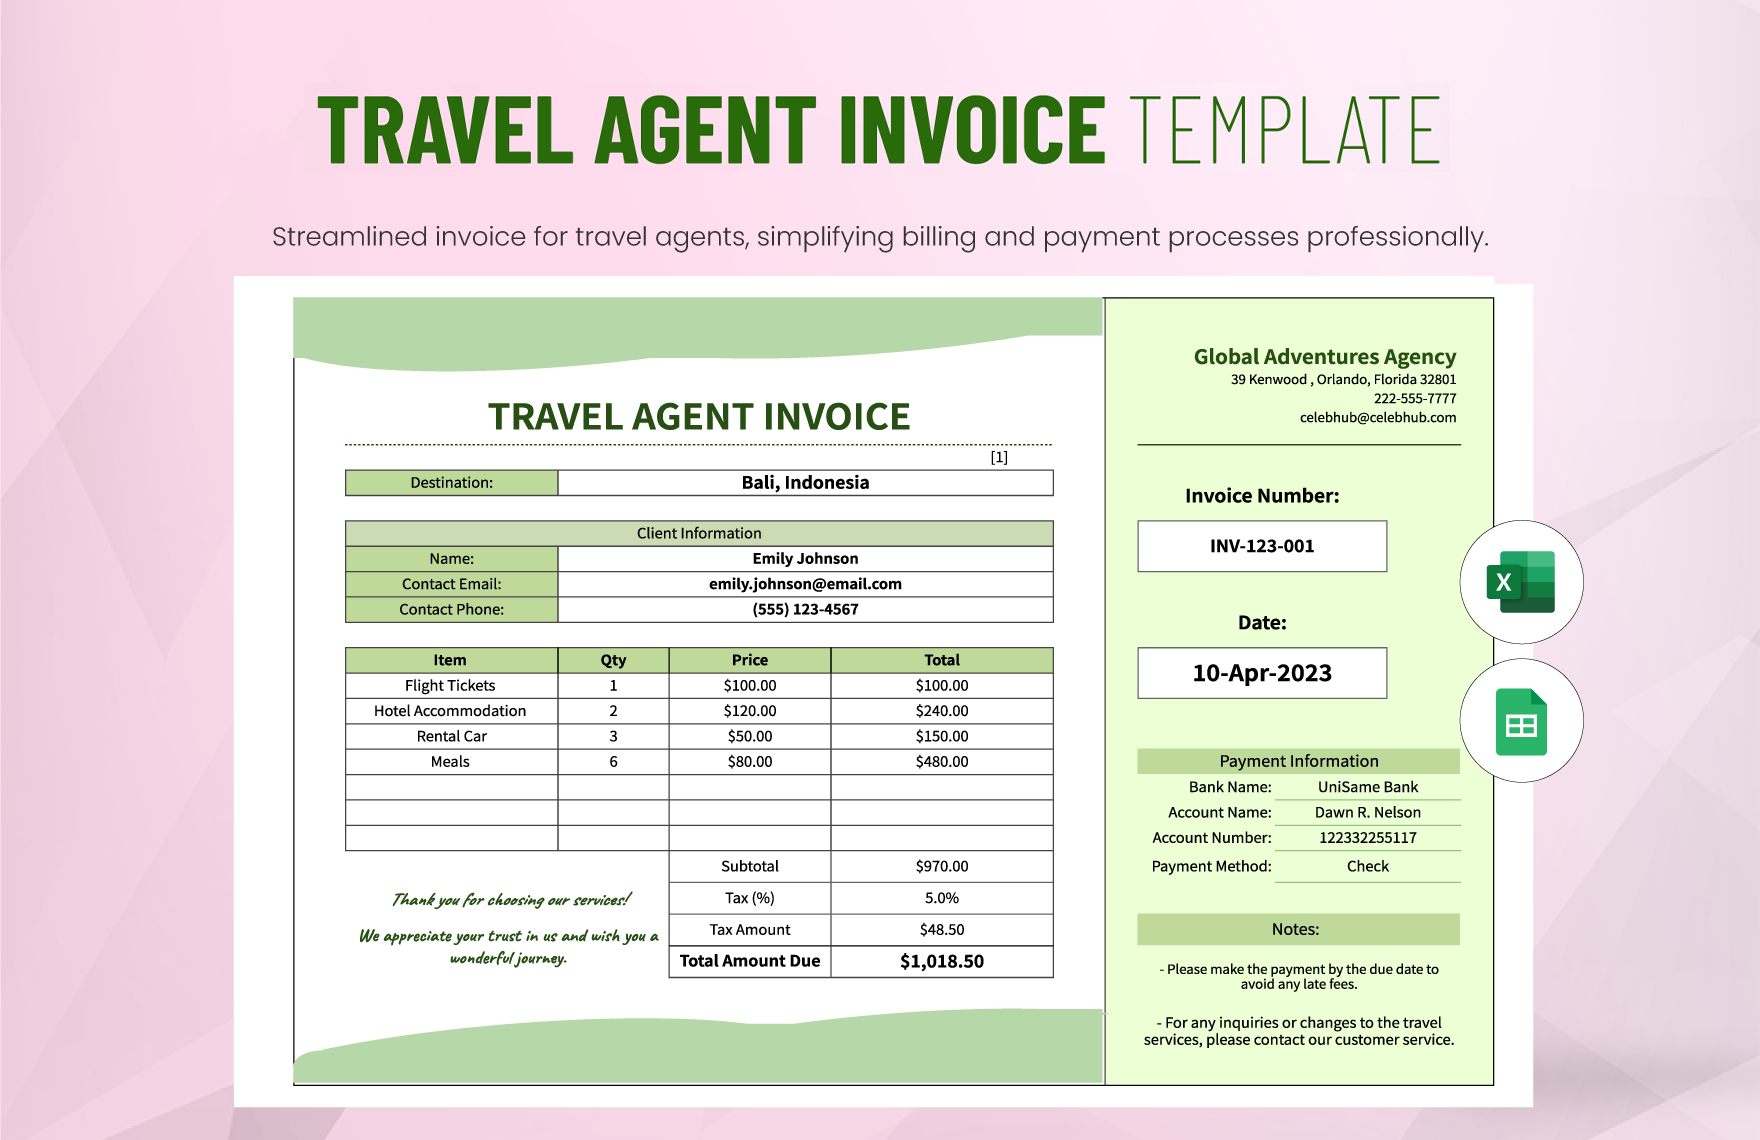 Travel Agent Invoice Template in Excel, Google Sheets